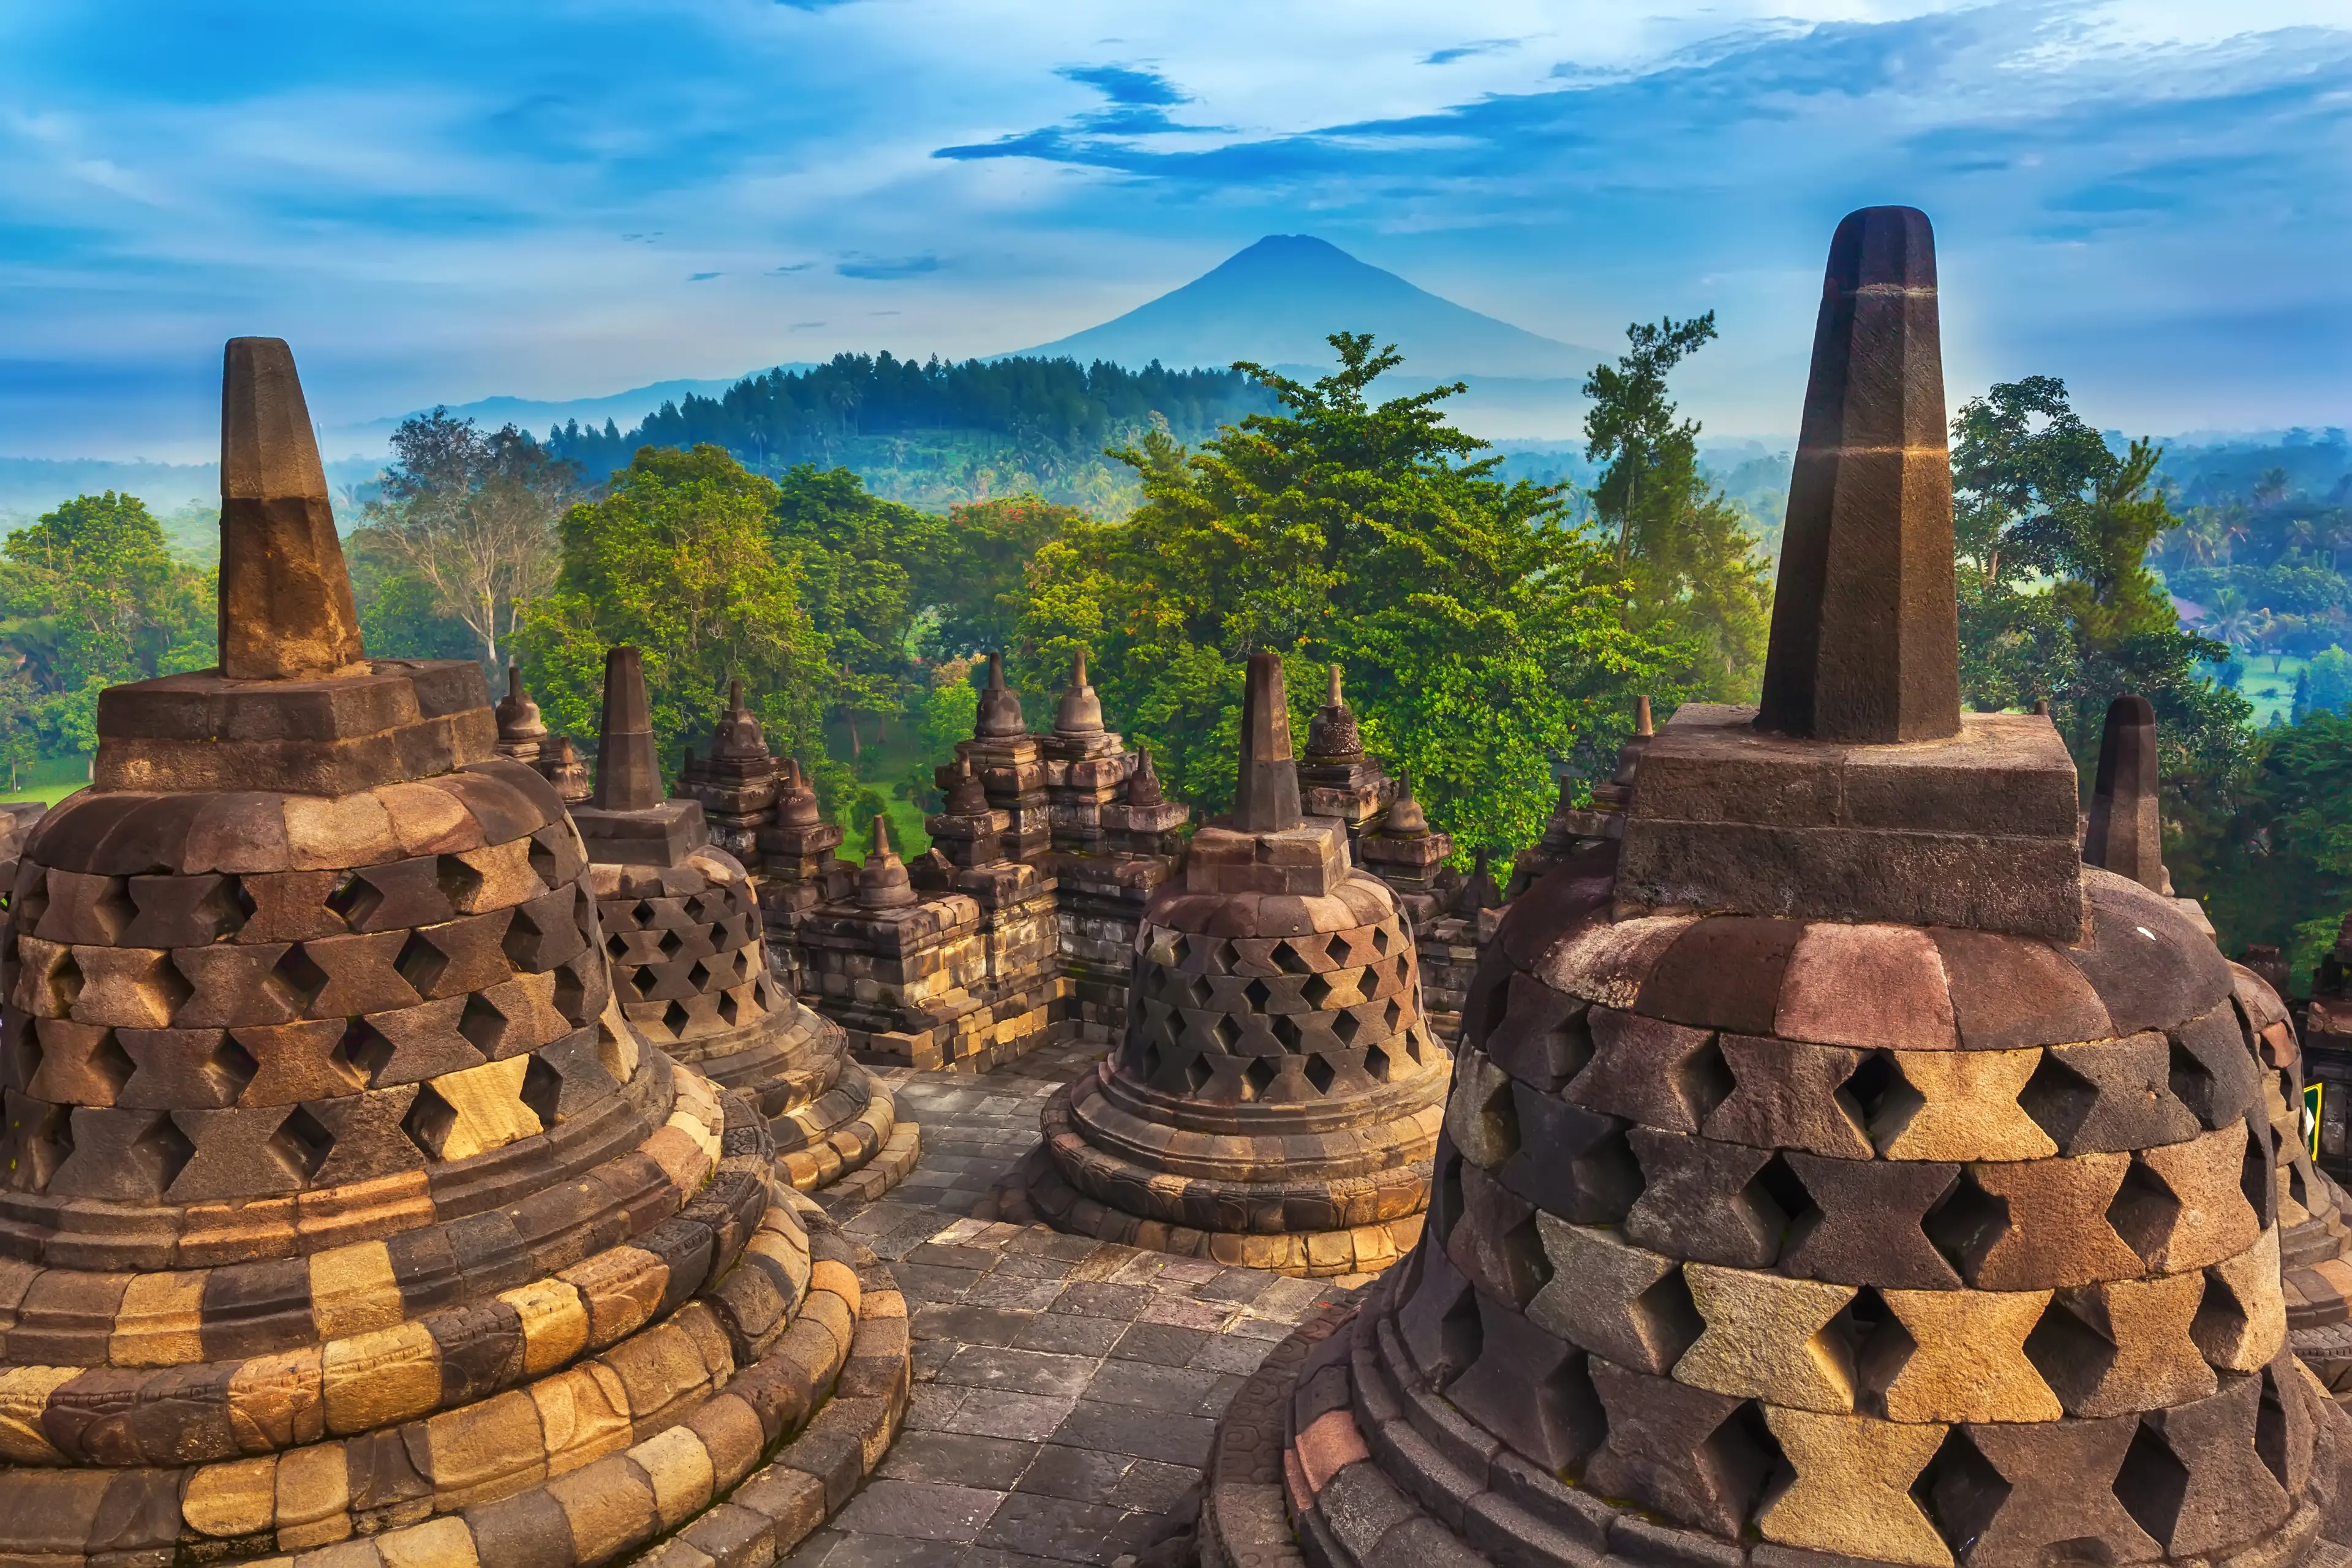 1-Day Local Family Adventure & Relaxation in Bali, Indonesia